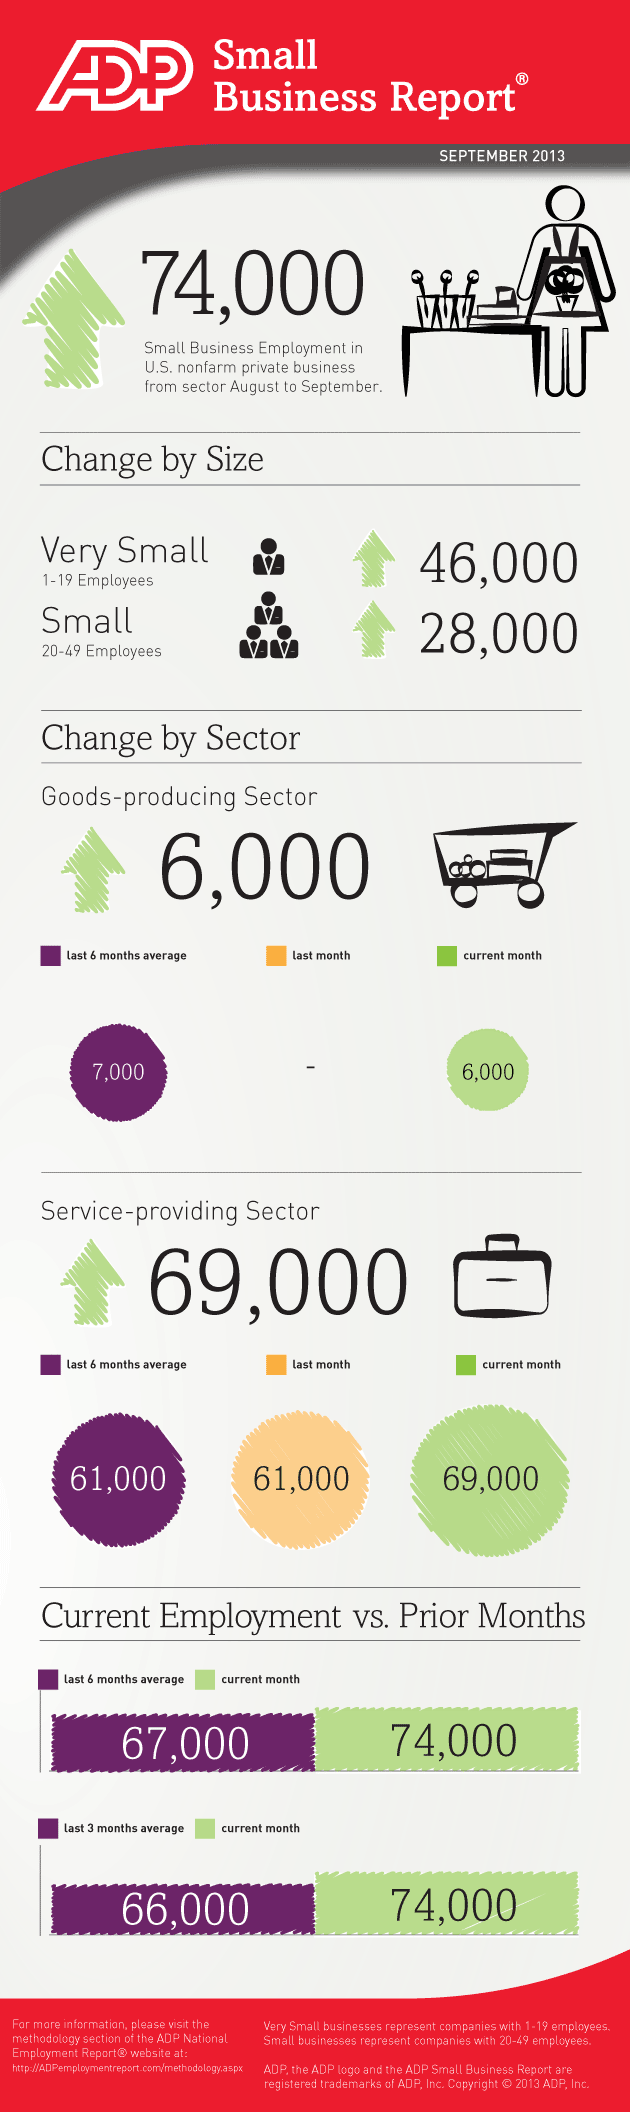 Small Businesses Created 74,000 Jobs in September Infographic